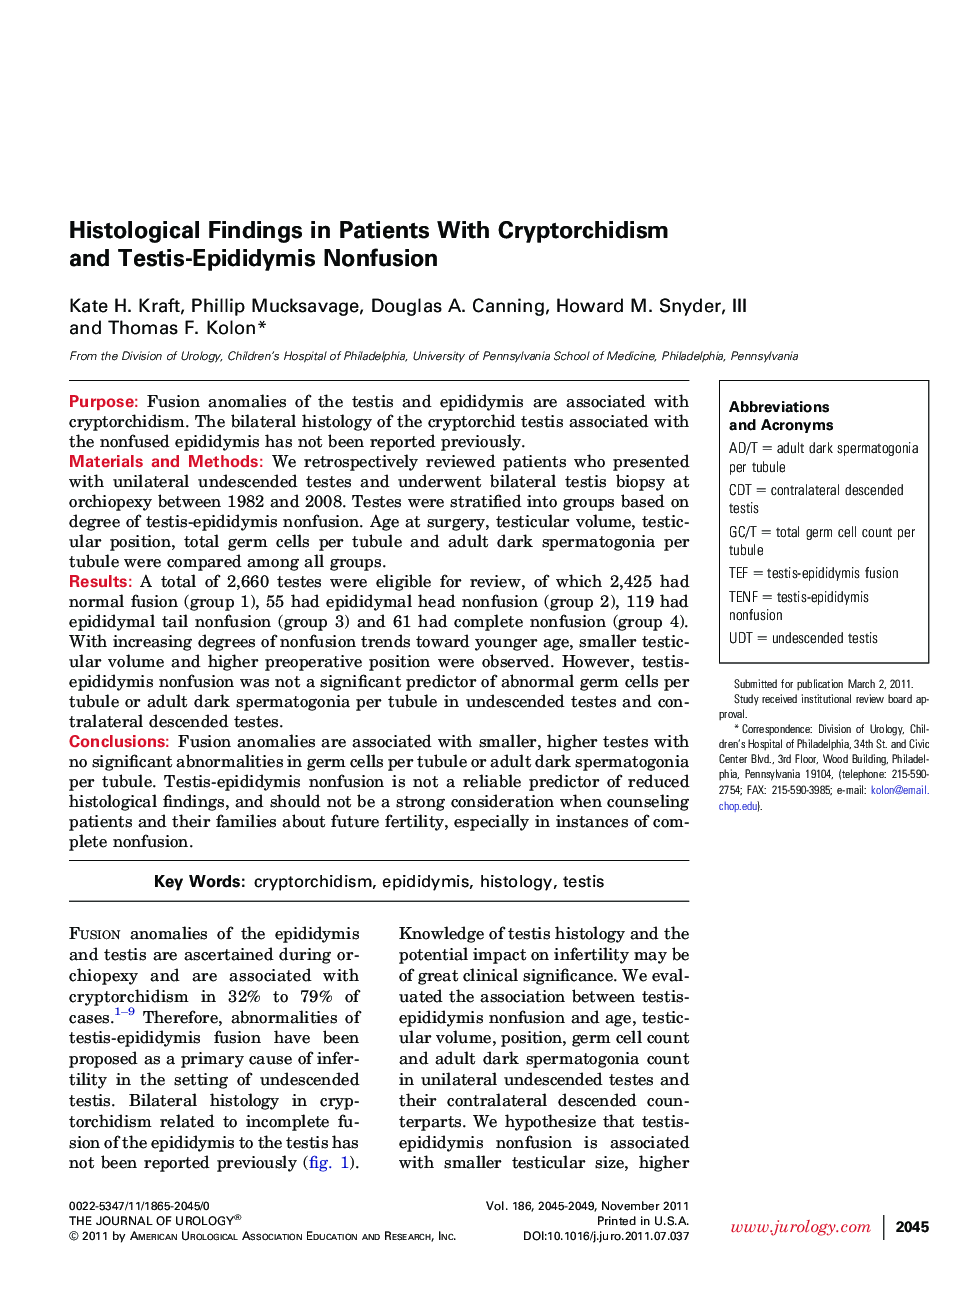 Histological Findings in Patients With Cryptorchidism and Testis-Epididymis Nonfusion 